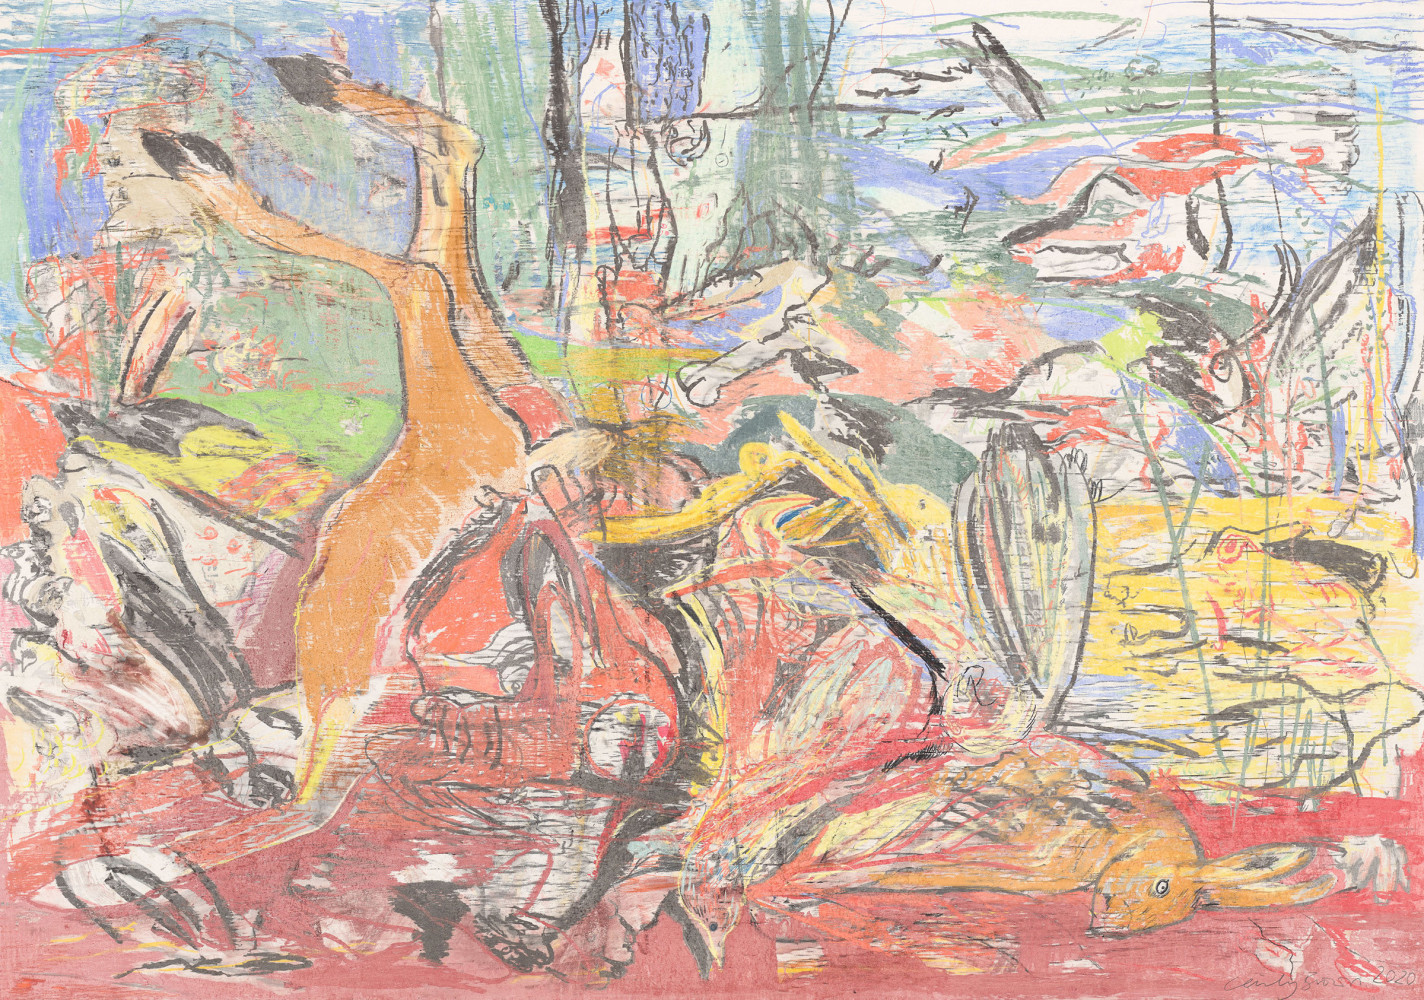 Cecily Brown, Untitled (Still Life in a Landscape), 2020